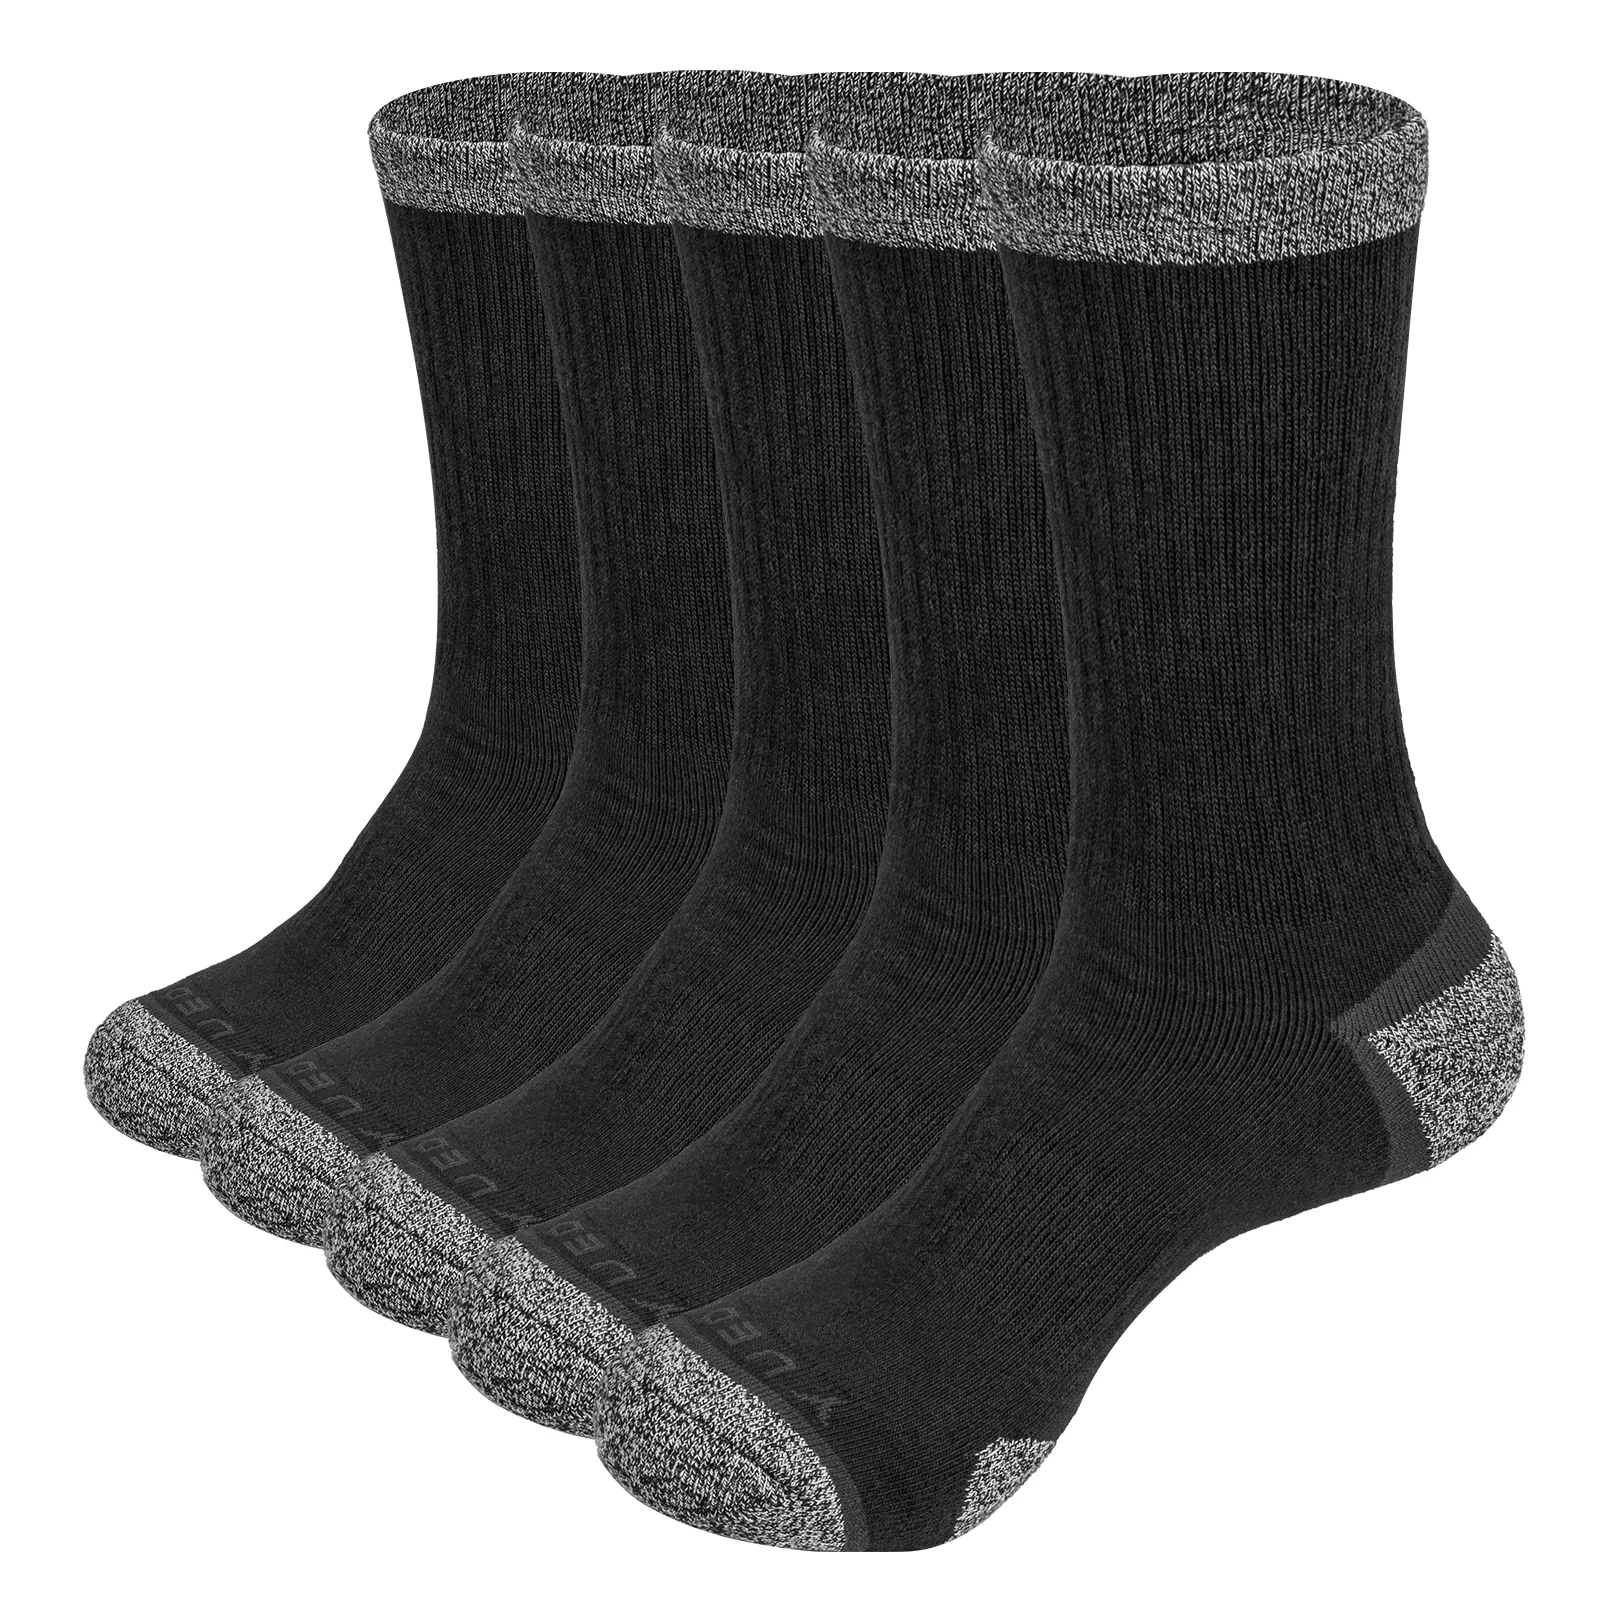 

YUEDGE Men's Terry Cushion Cotton Crew Outdoor Sports Trekking Hiking Socks calcetines Winter Warm Thermal Socks(5 Pairs/Pack)